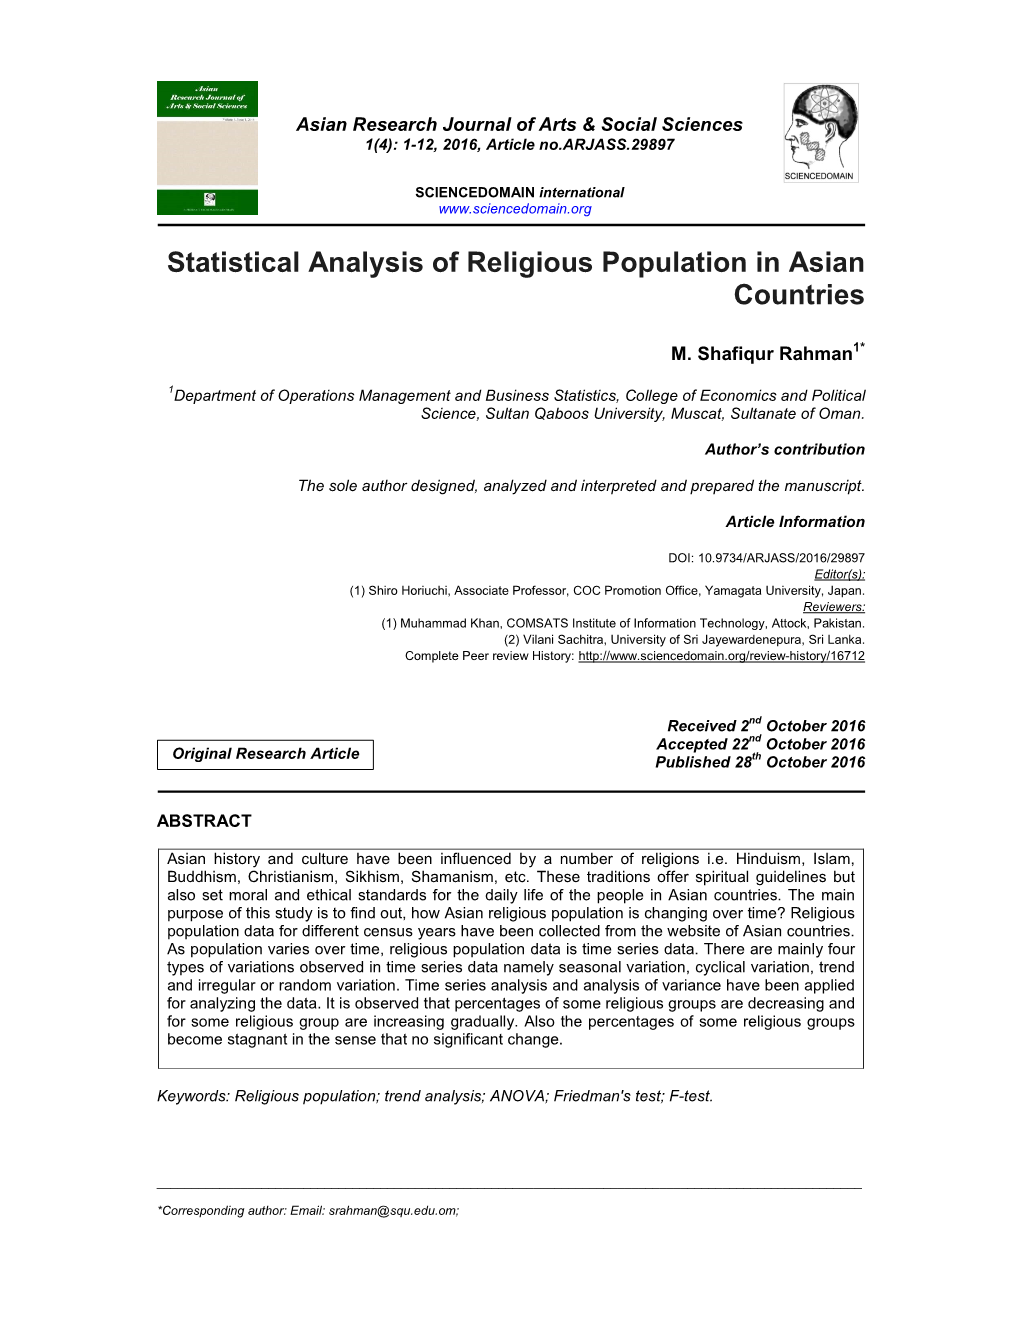 Statistical Analysis of Religious Population in Asian Countries